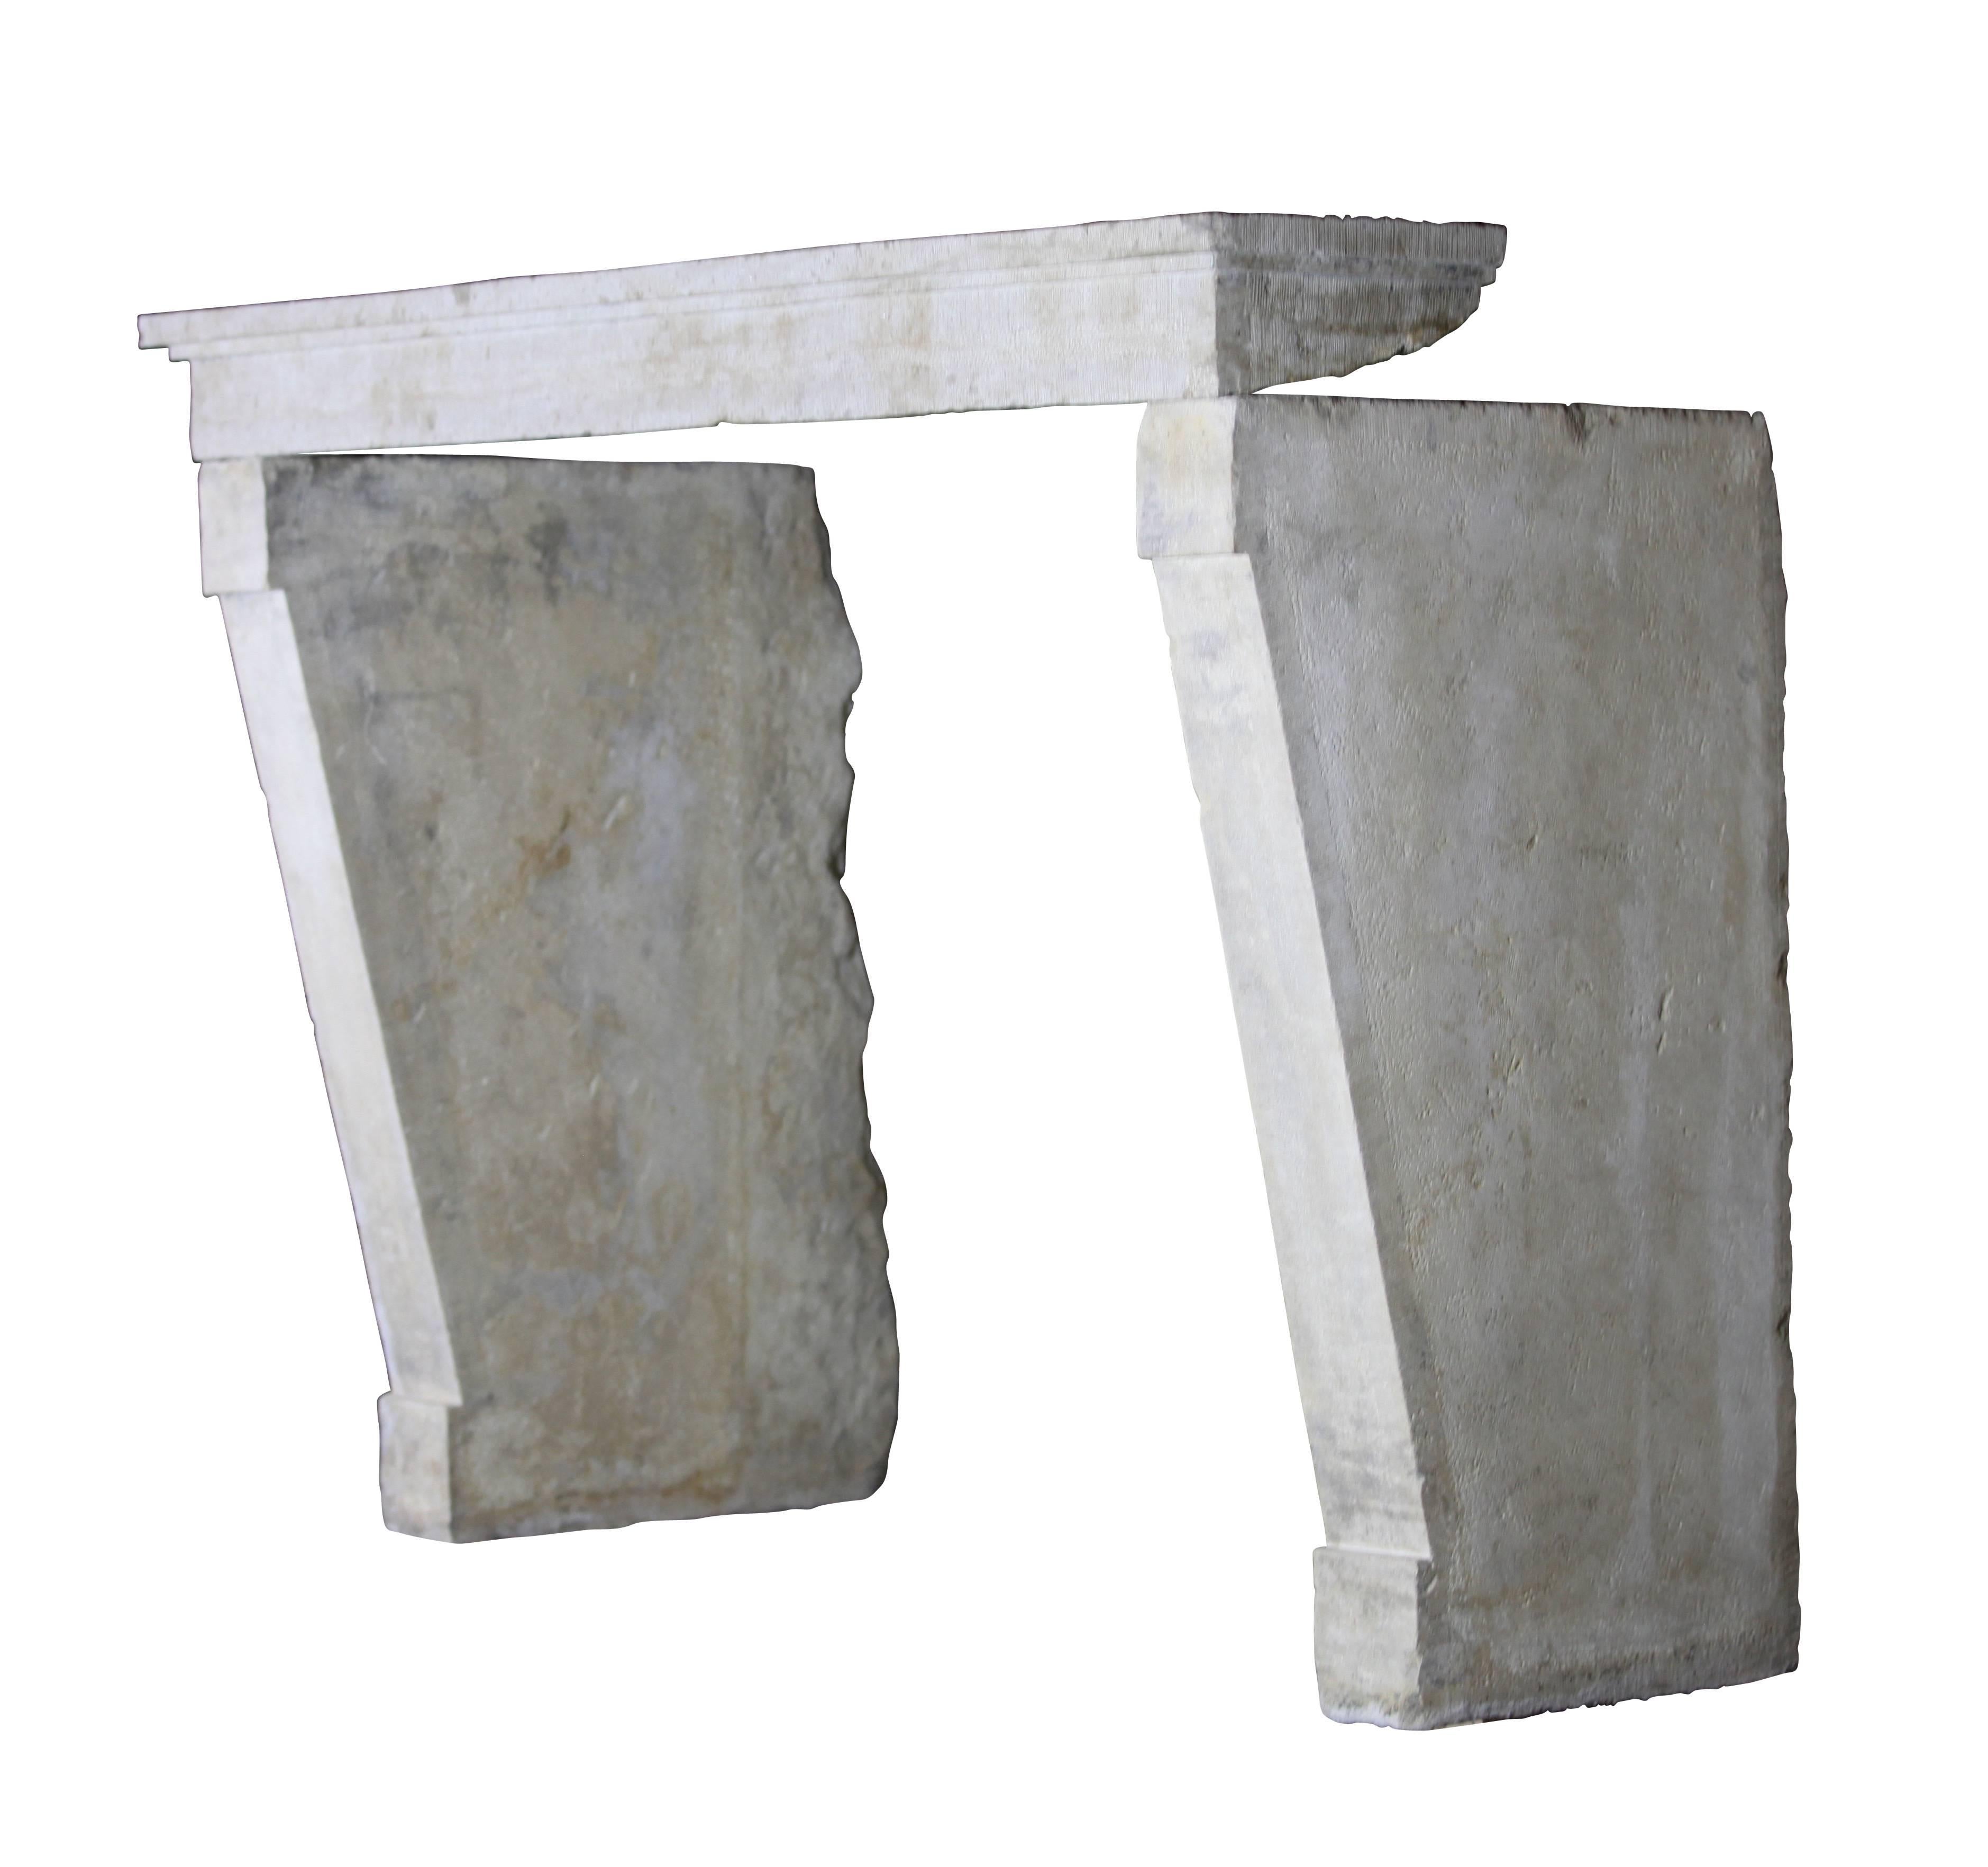 This French country original antique fireplace mantle with the straight lines matches many contemporary country chique interior design concepts. The jambs are going slightly backwards. A mantel as you find in the dining room of Chateau de